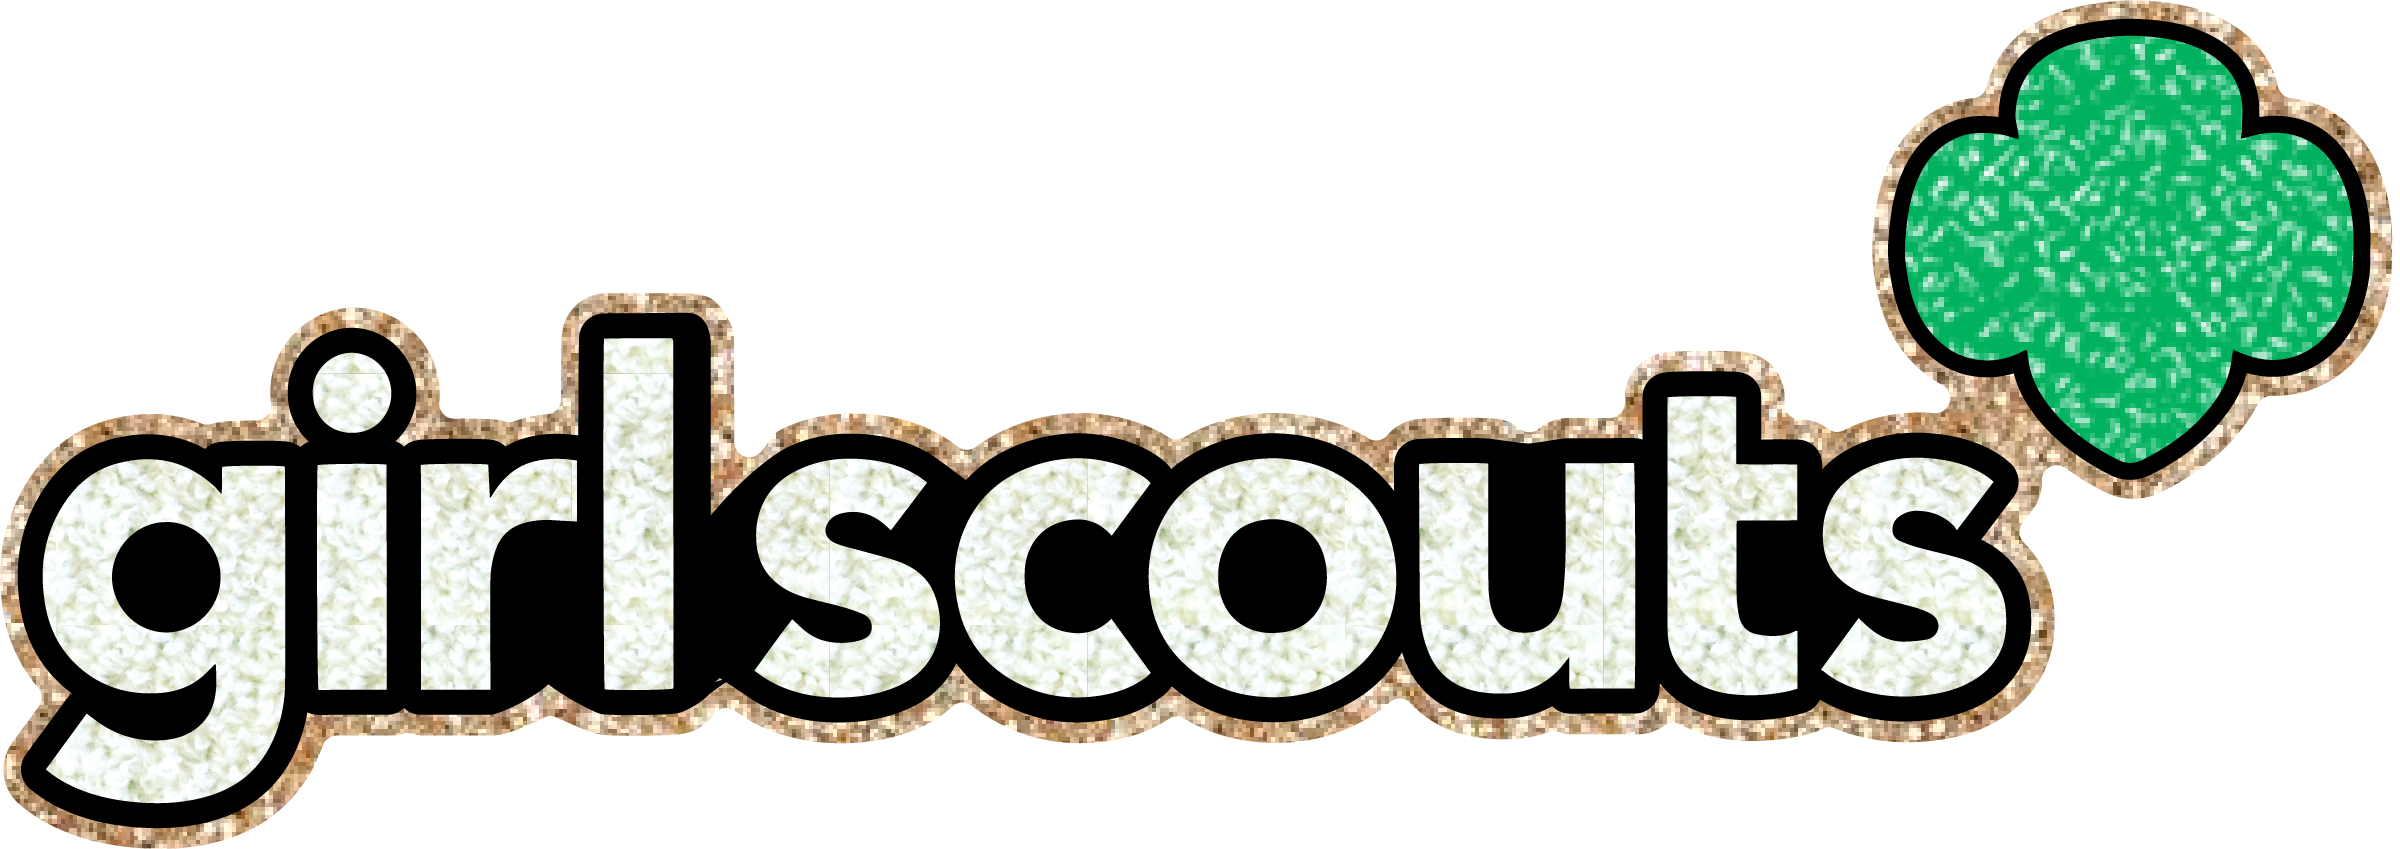 Girl Scouts Supersize Logo